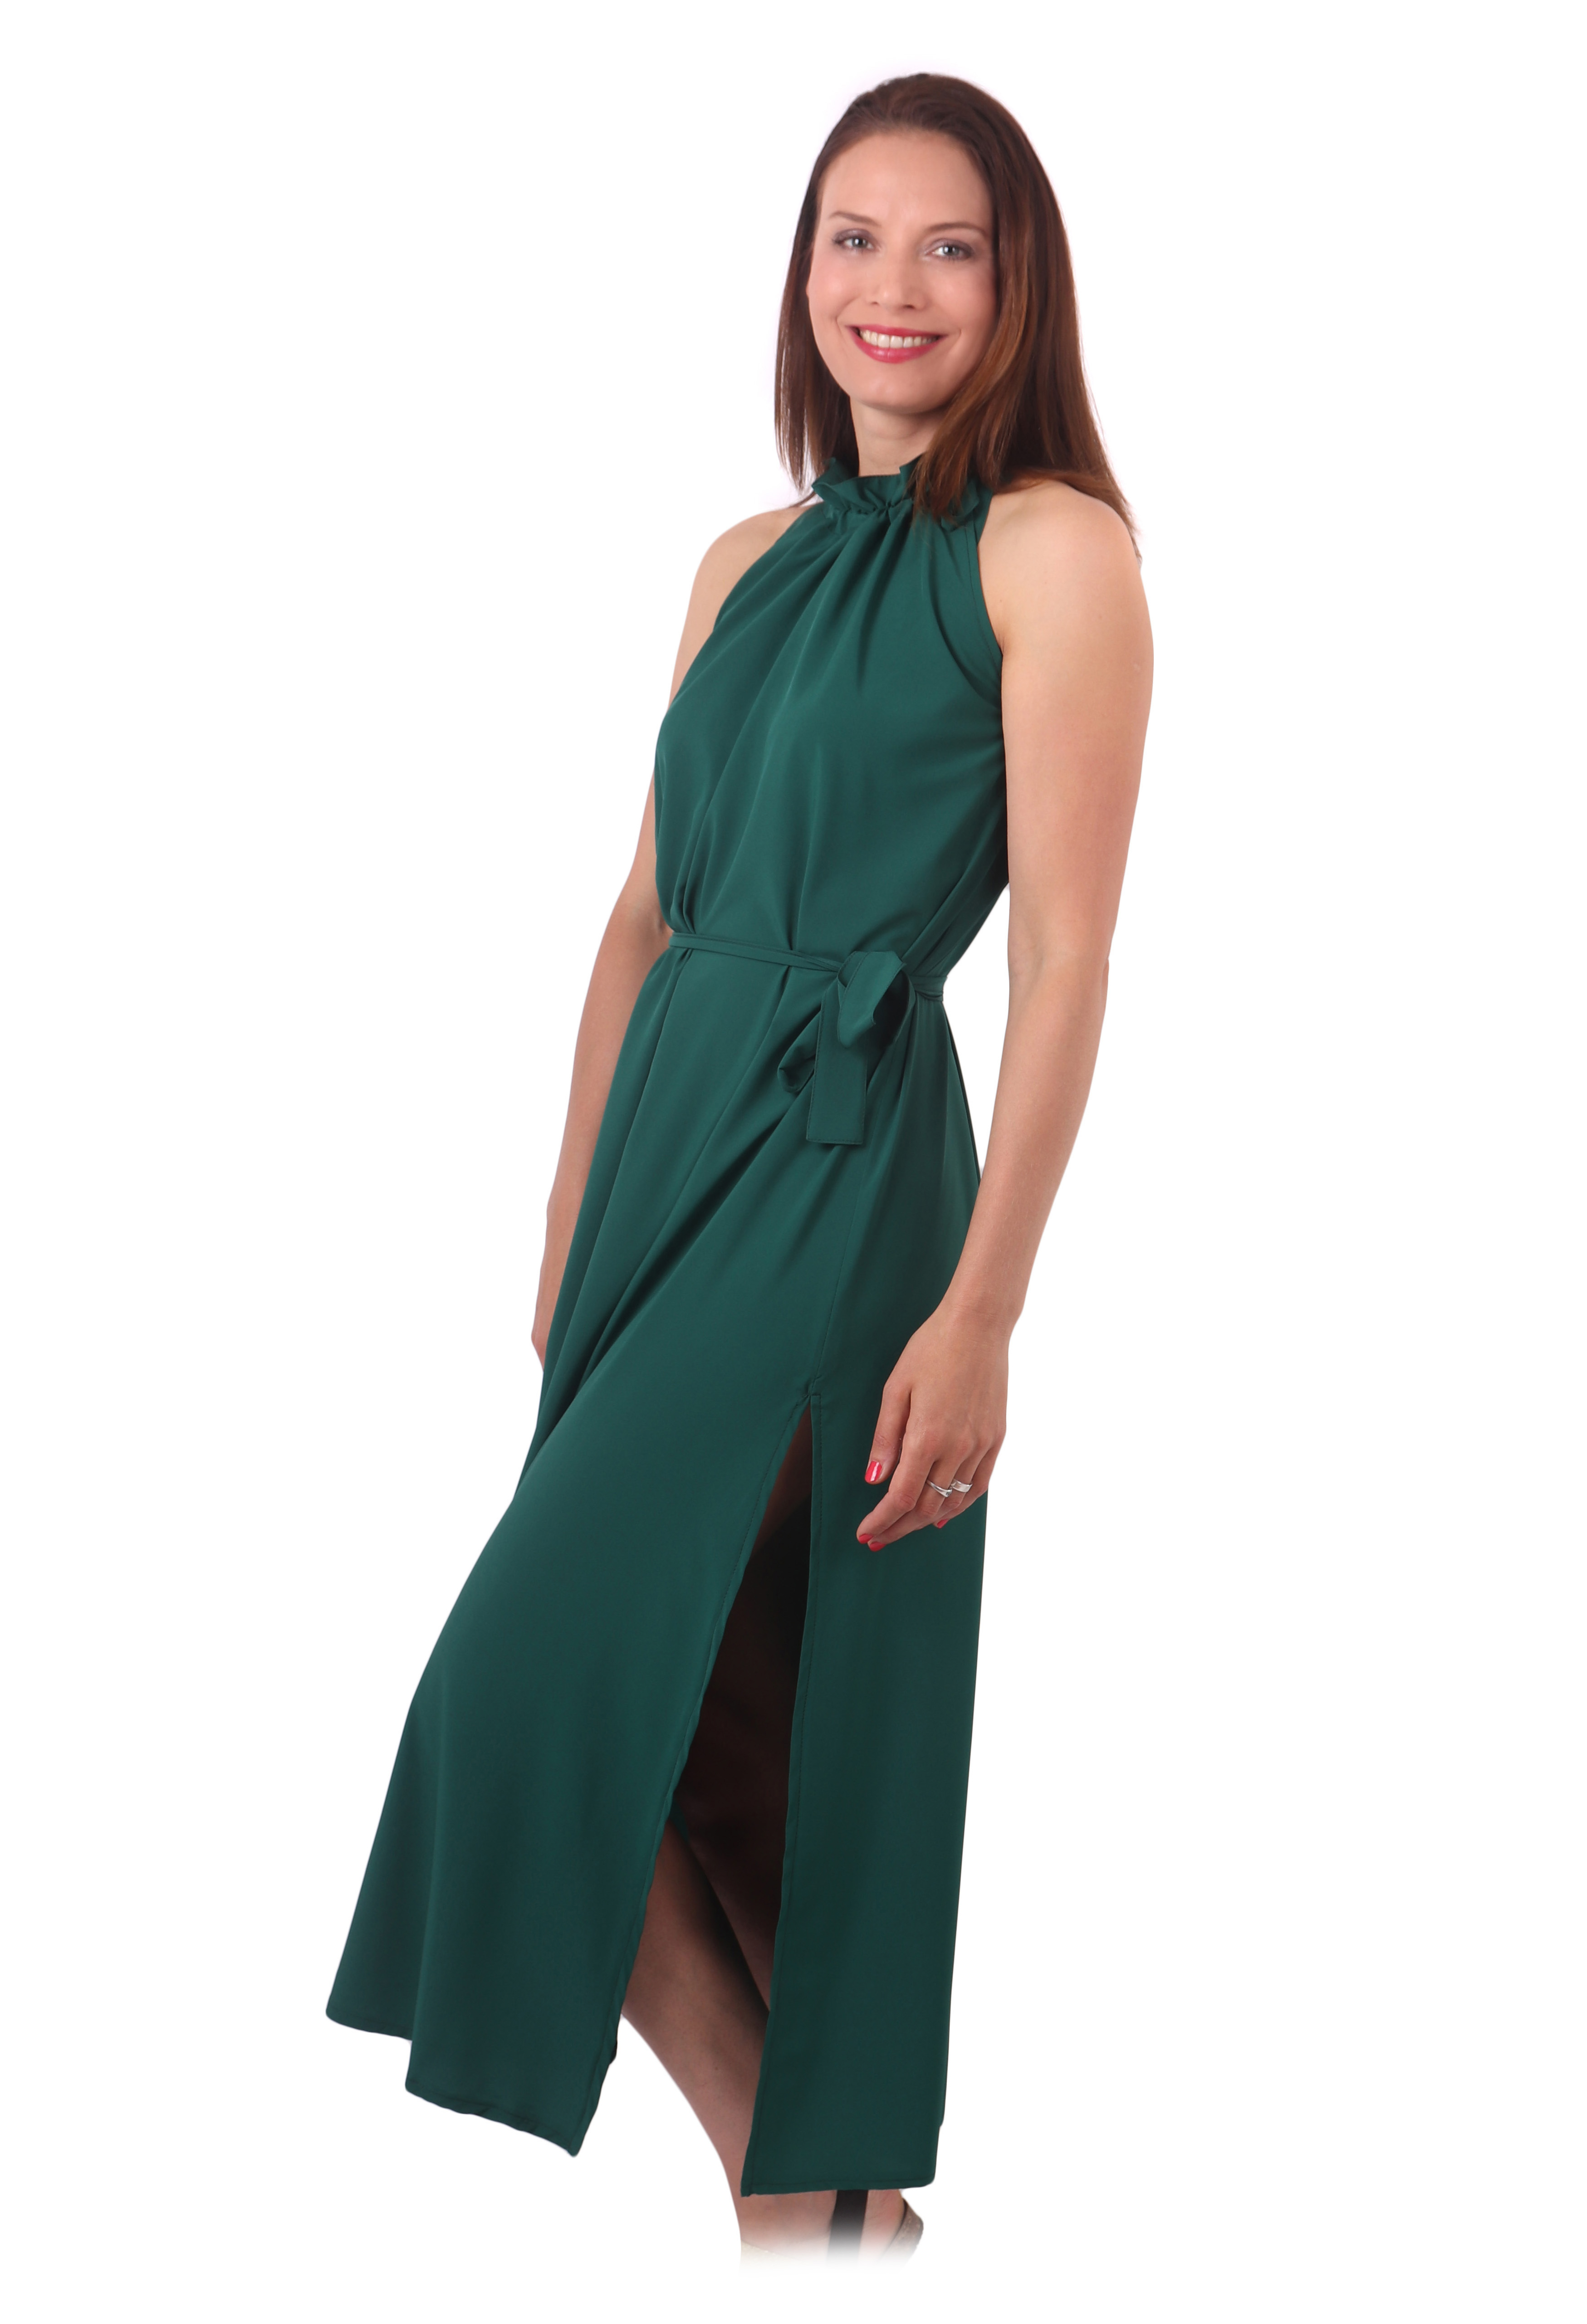 Coctail party dress, long, emerald green